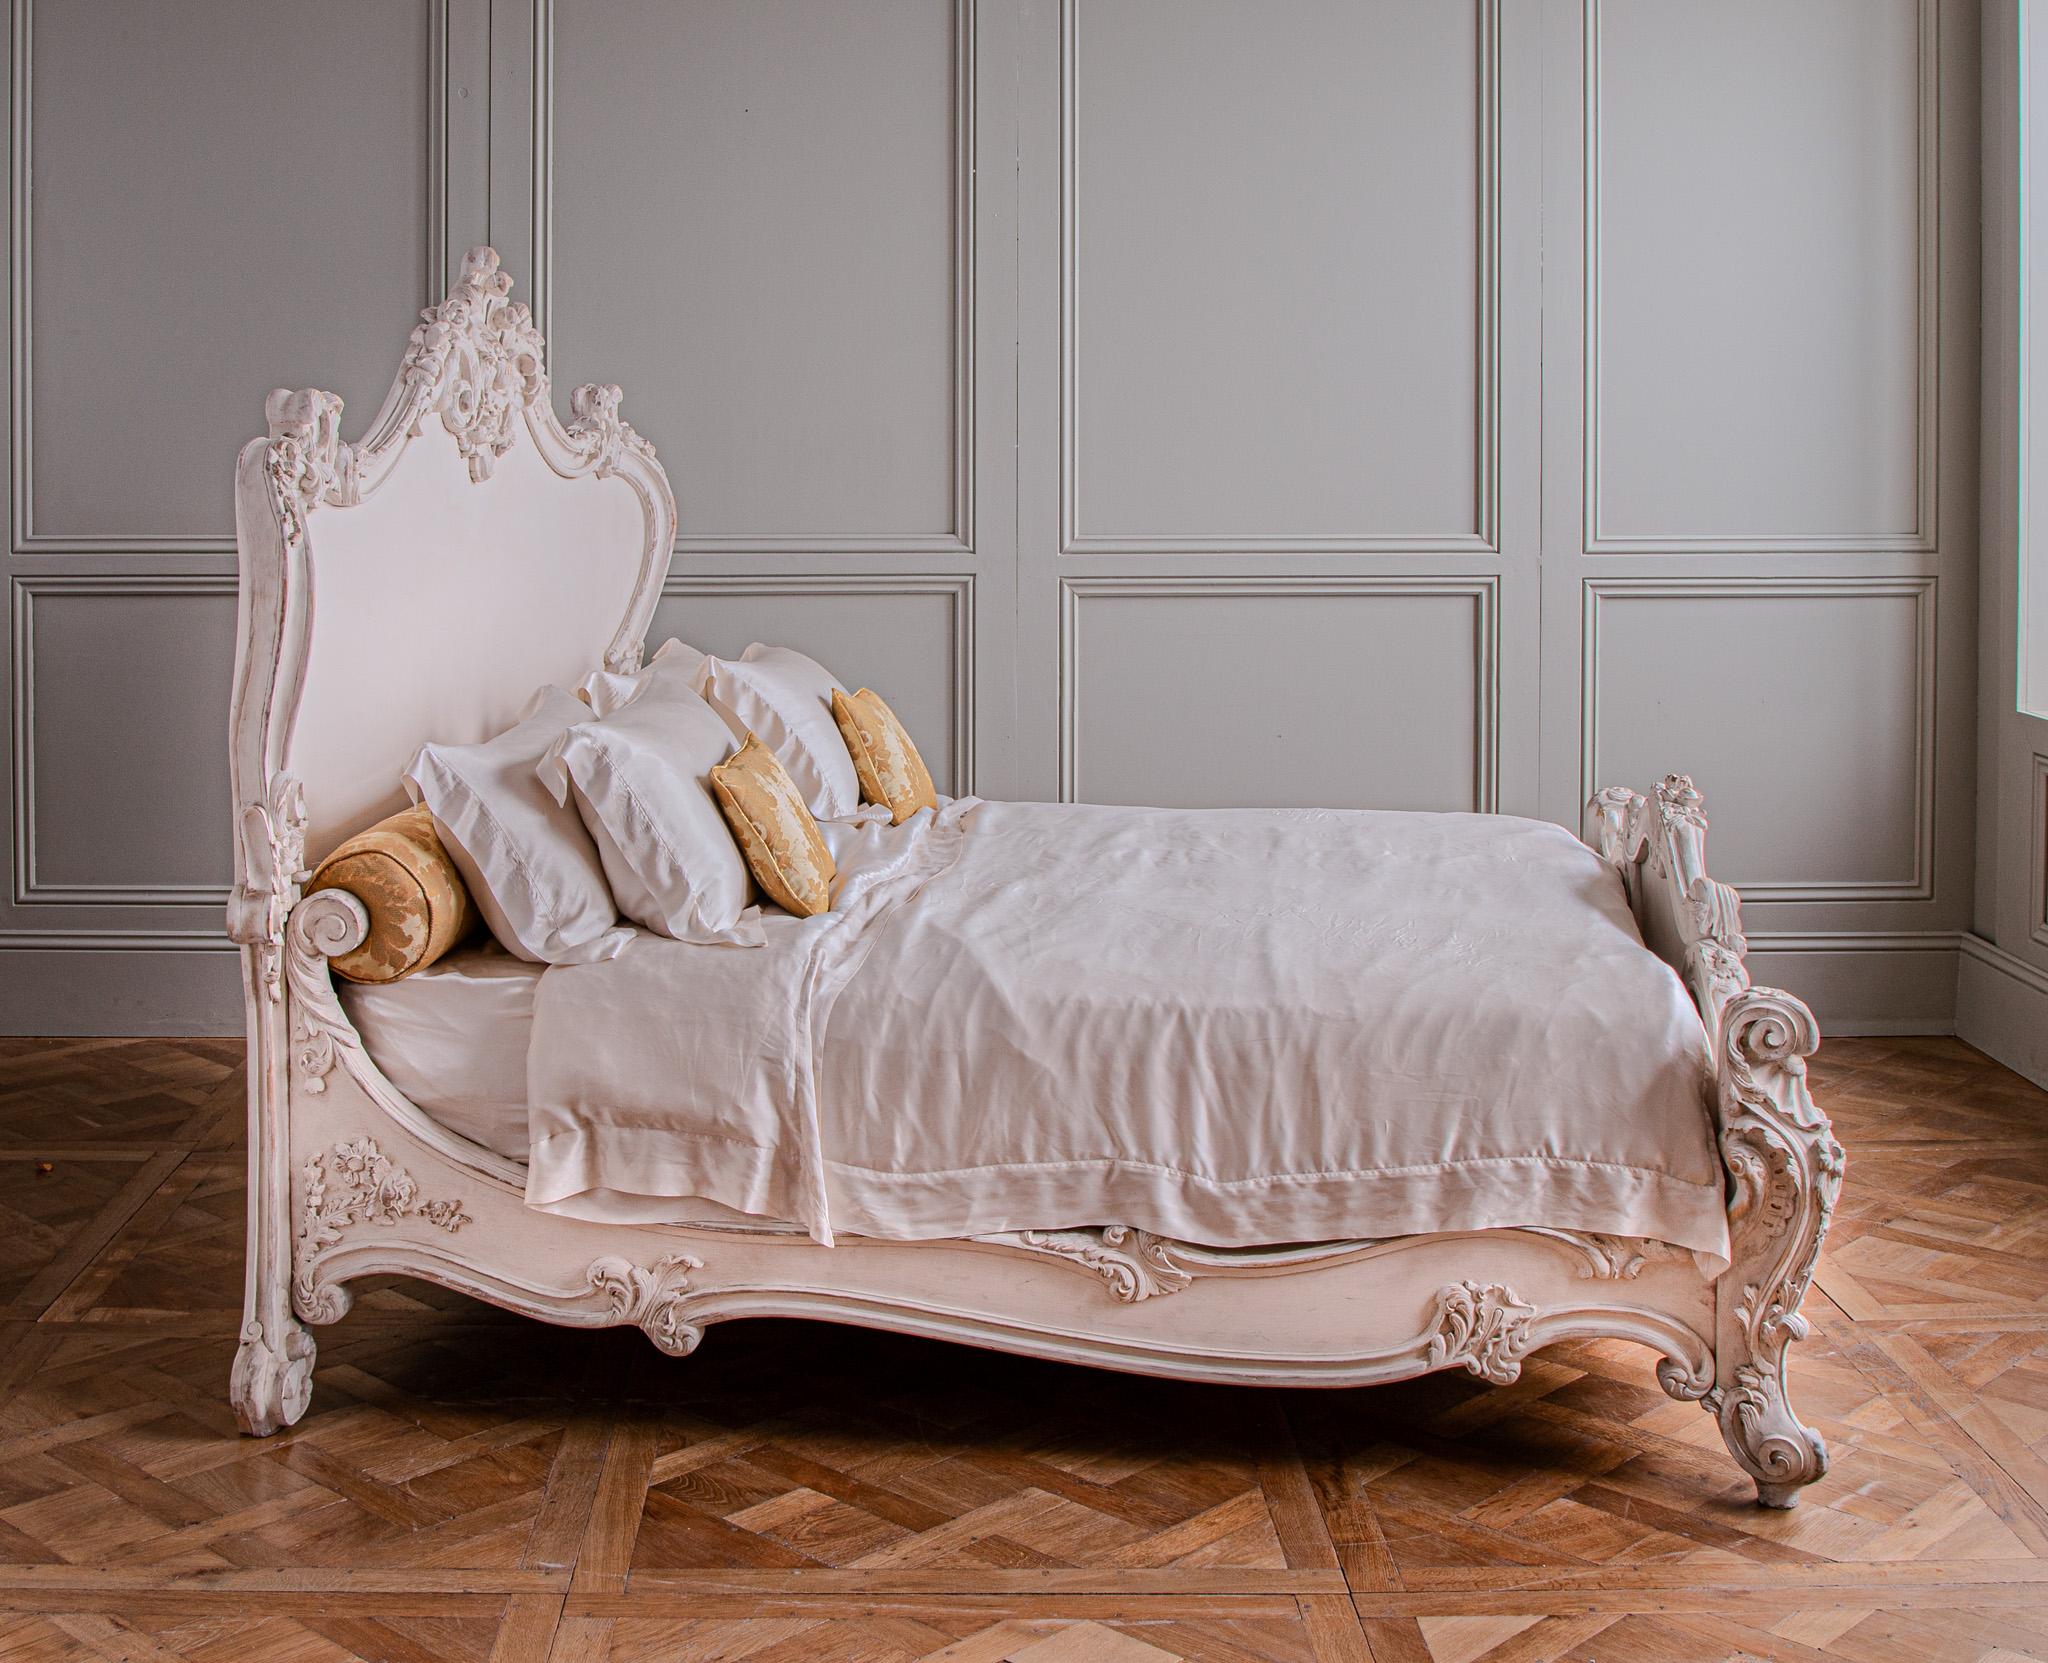 English A French Rococo Style 'Cherub' Bed Painted In White Gesso By La Maison London For Sale